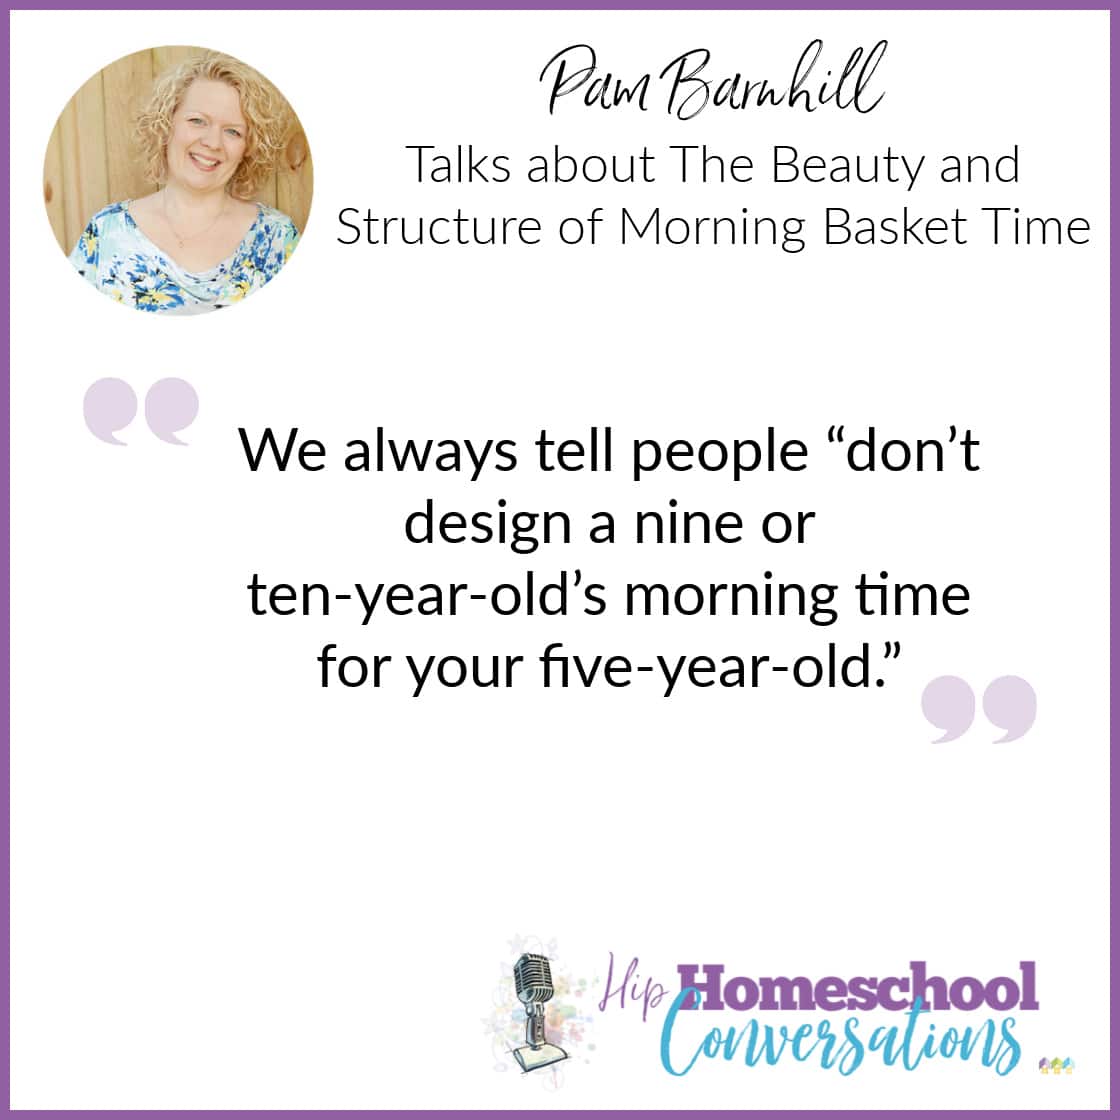 Homeschooling offers wonderful flexibility and freedom, but getting started each day and covering everything can be challenging and stressful. Join Trish Corlew as she interviews Pam Barnhill, author, speaker, and veteran homeschooling mom.